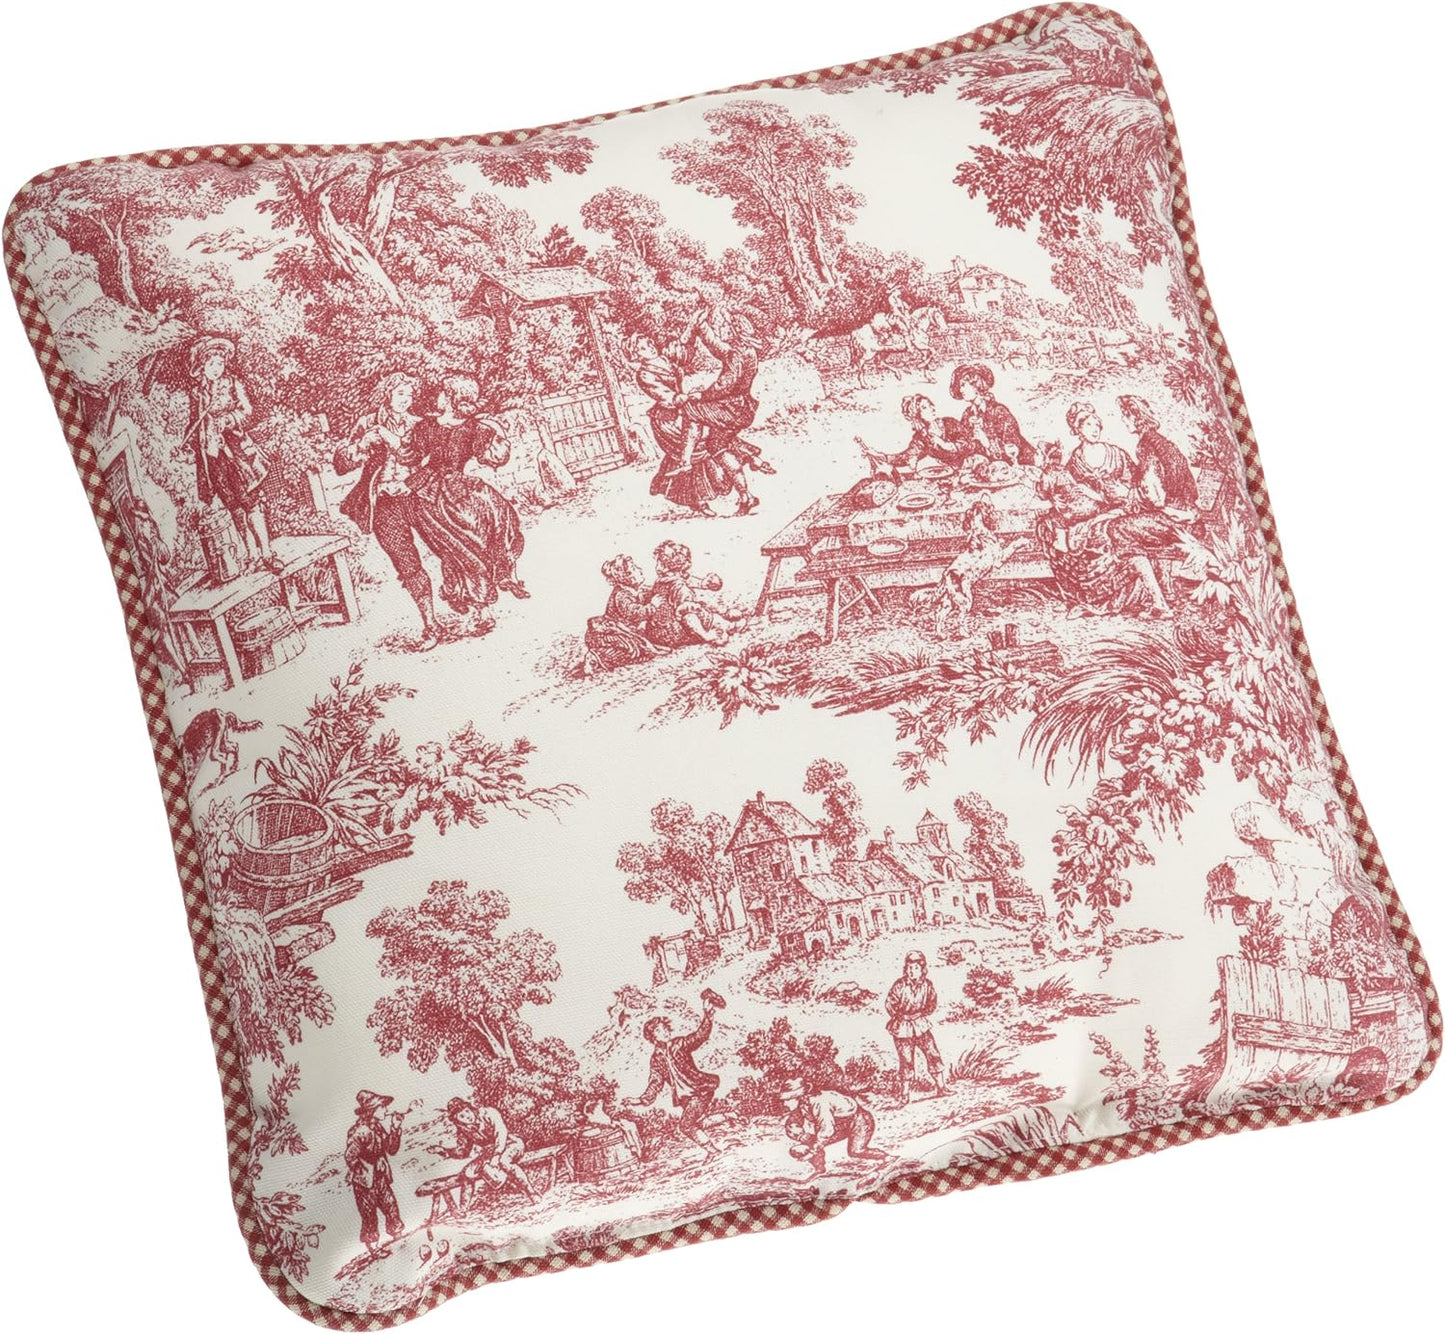 Ellis Curtain Victoria Park Toile 68-Inch-By-84 Inch Tailored Panel Pair with Tiebacks, Black  Ellis Curtain Red Toss Pillow 